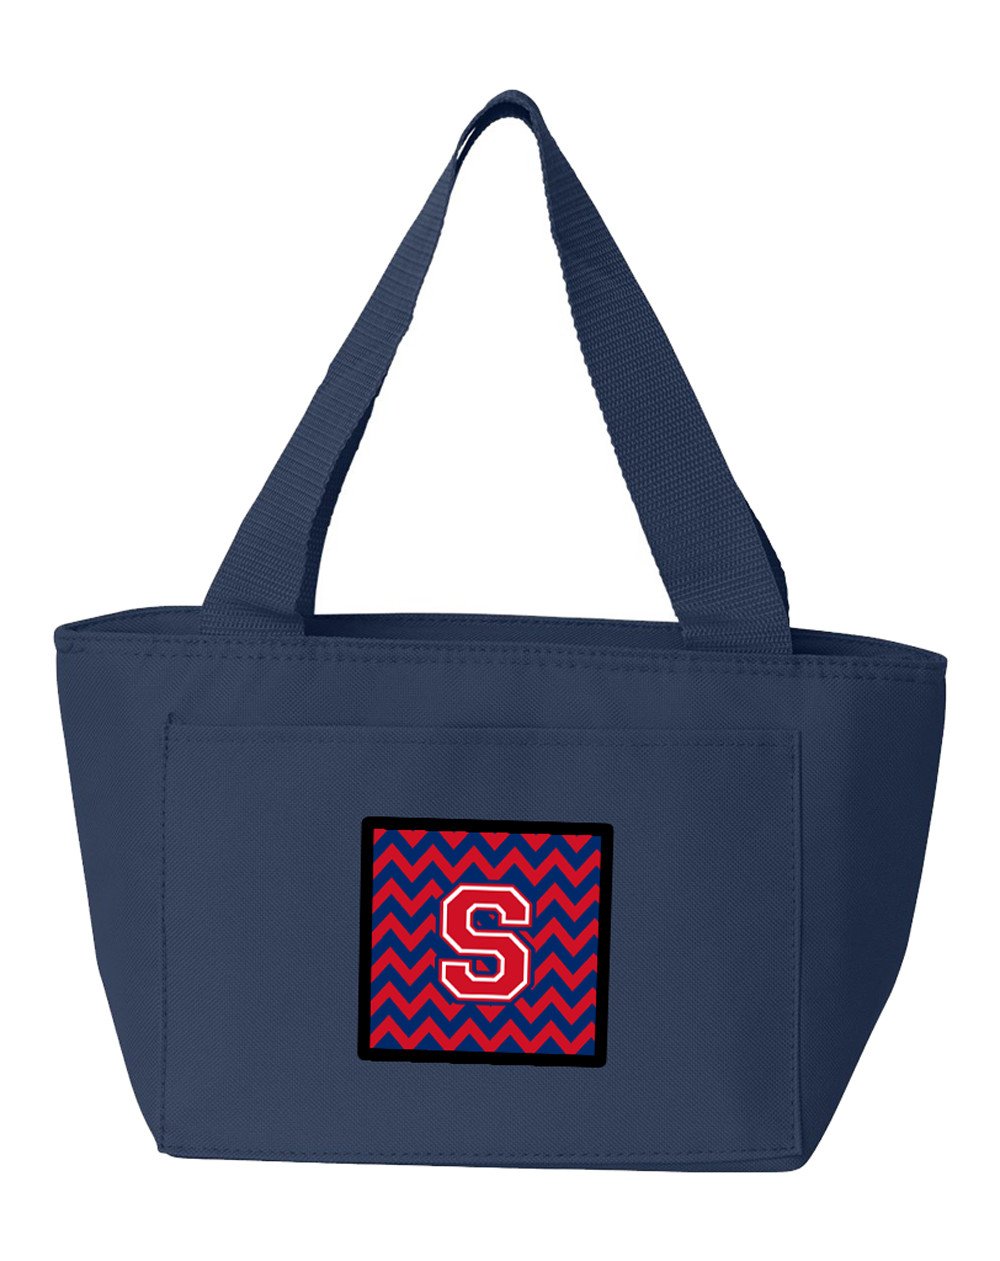 Letter S Chevron Yale Blue and Crimson Lunch Bag CJ1054-SNA-8808 by Caroline's Treasures